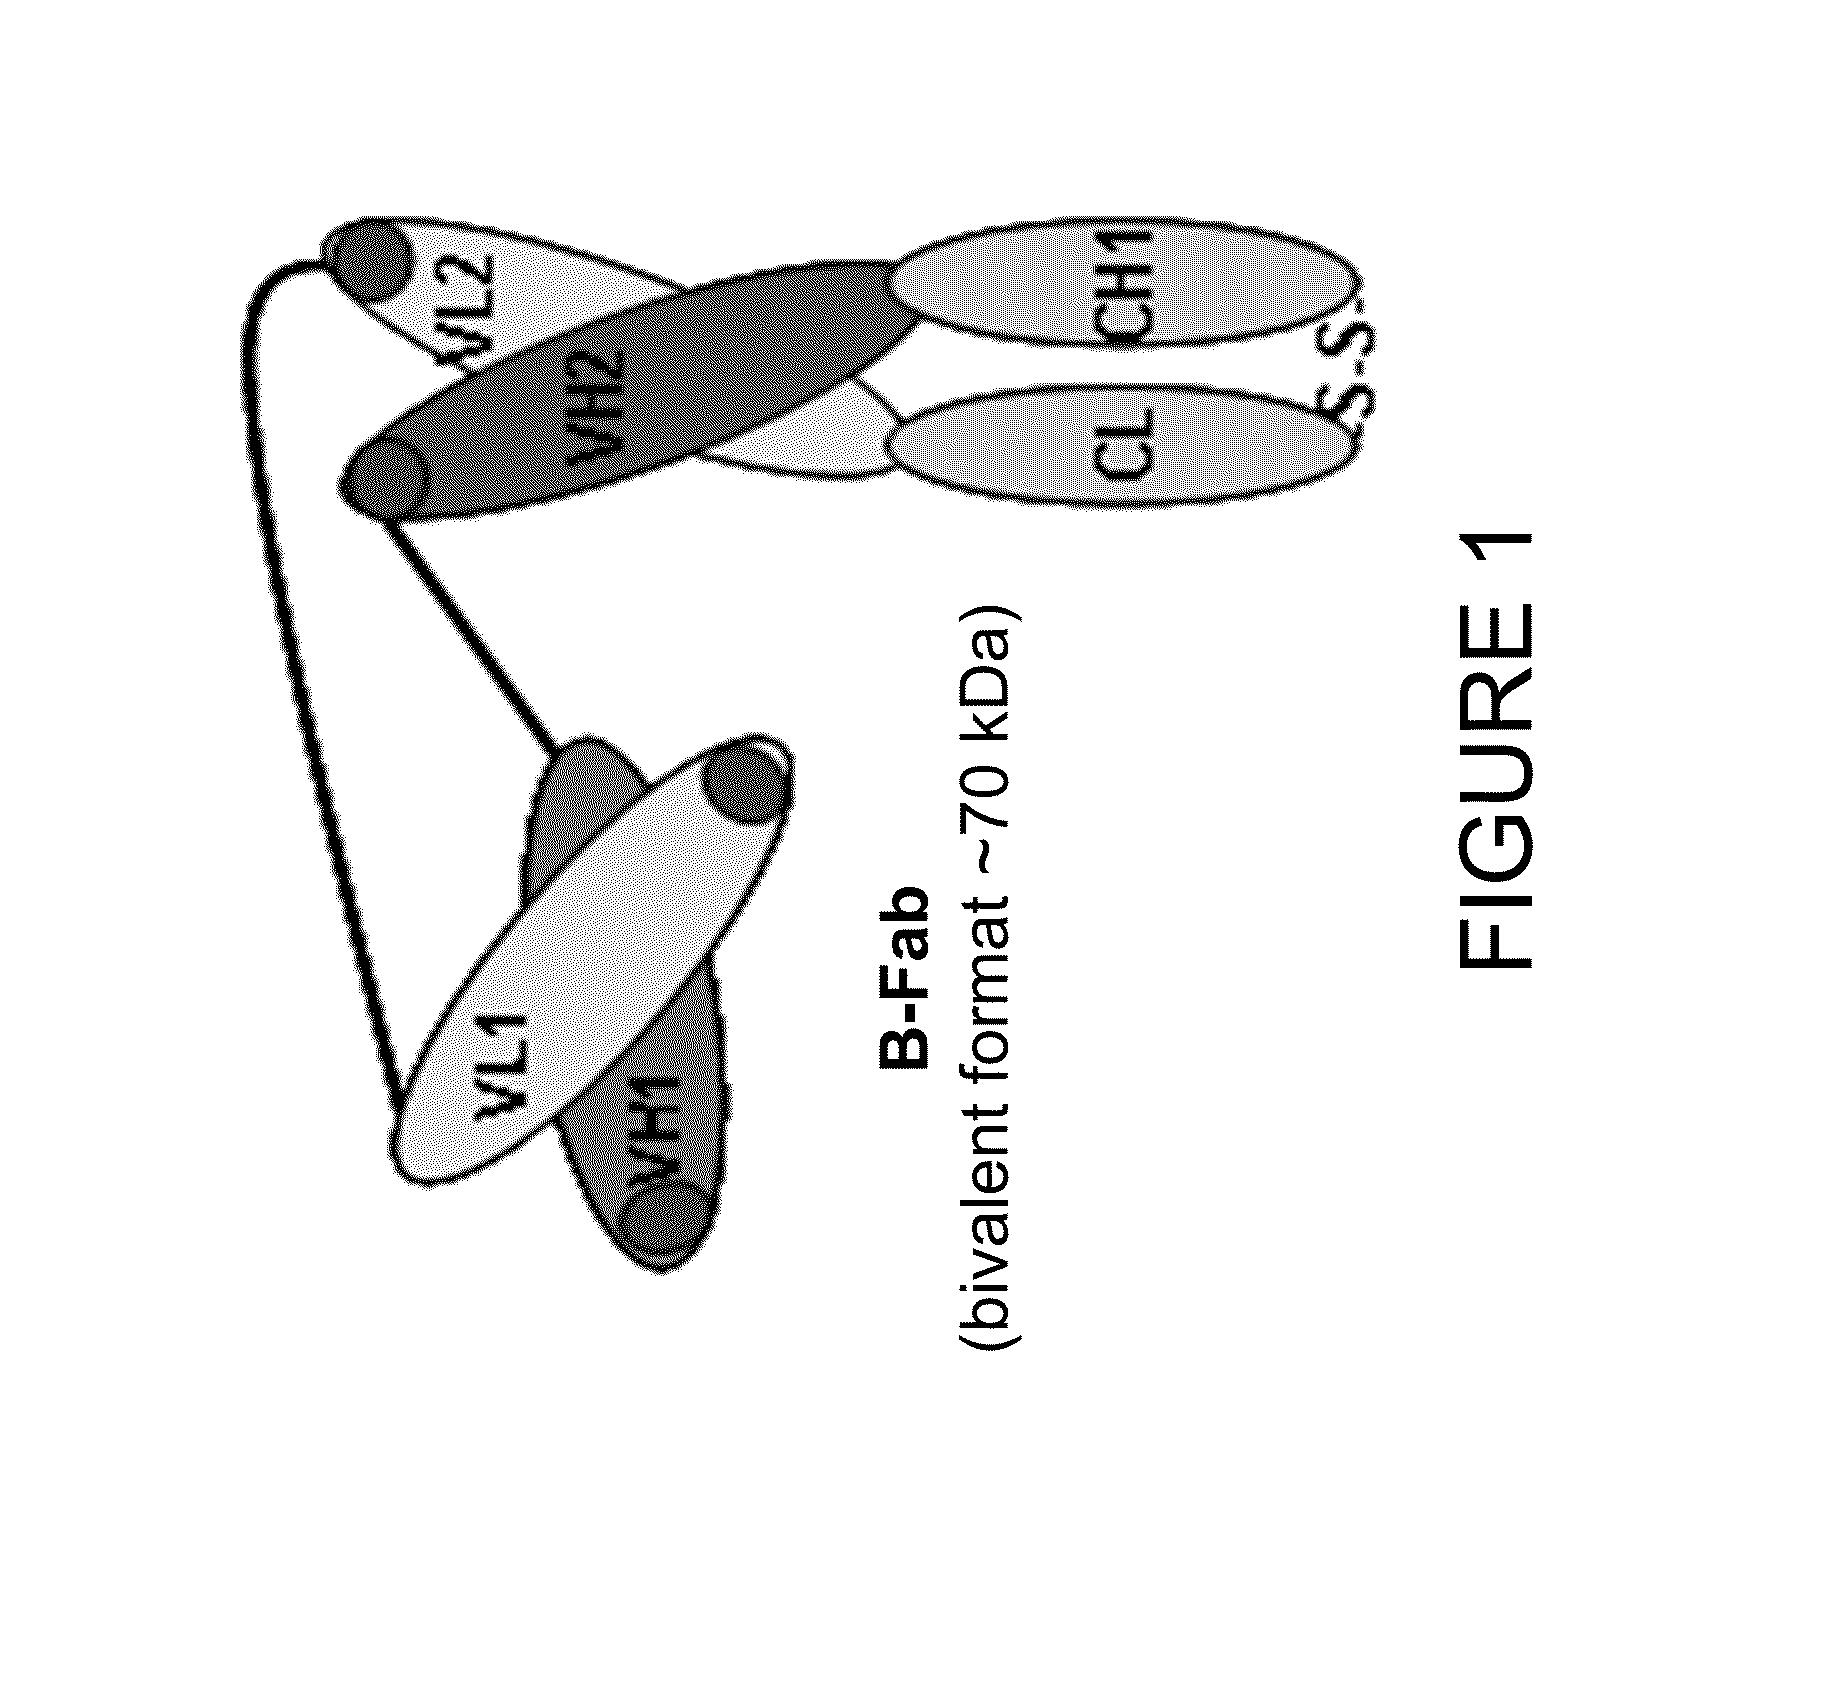 Immuno imaging agent for use with antibody-drug conjugate therapy